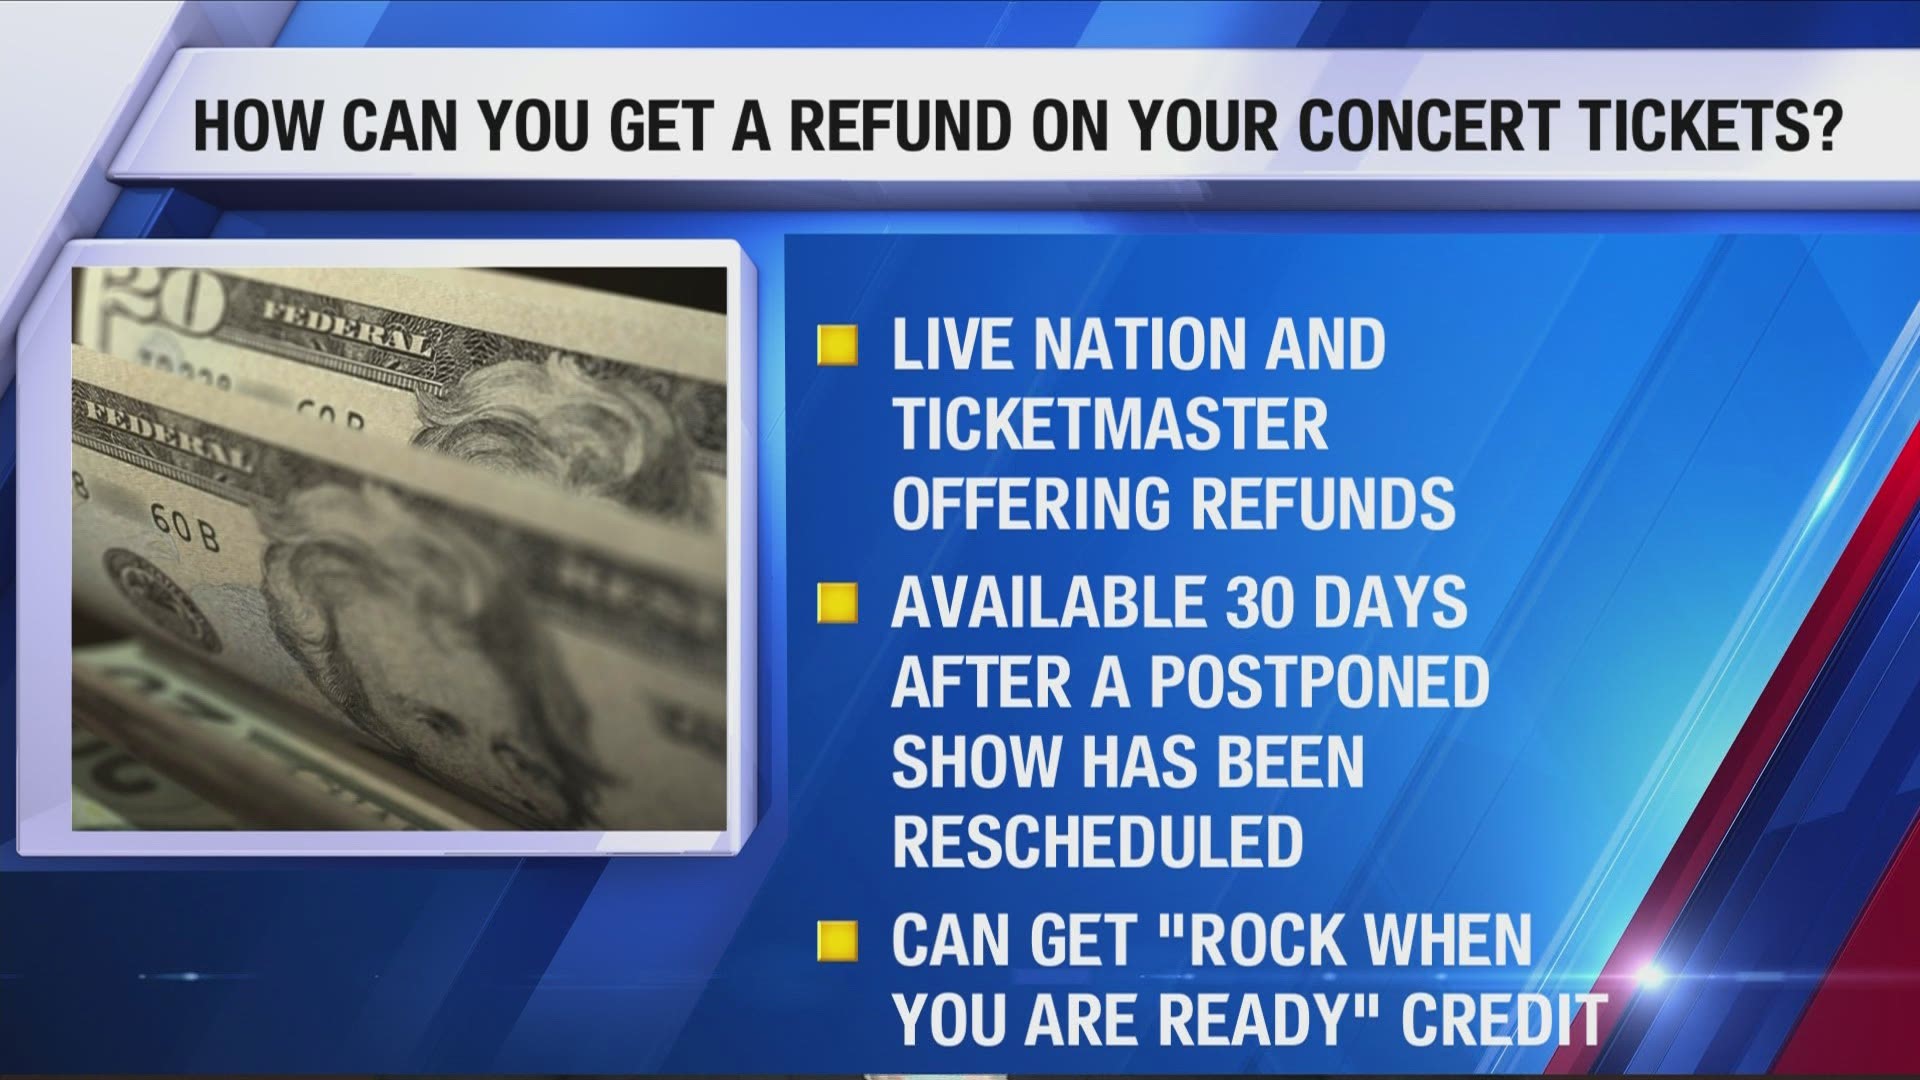 How do you get a ticket refund from an event canceled due to COVID19